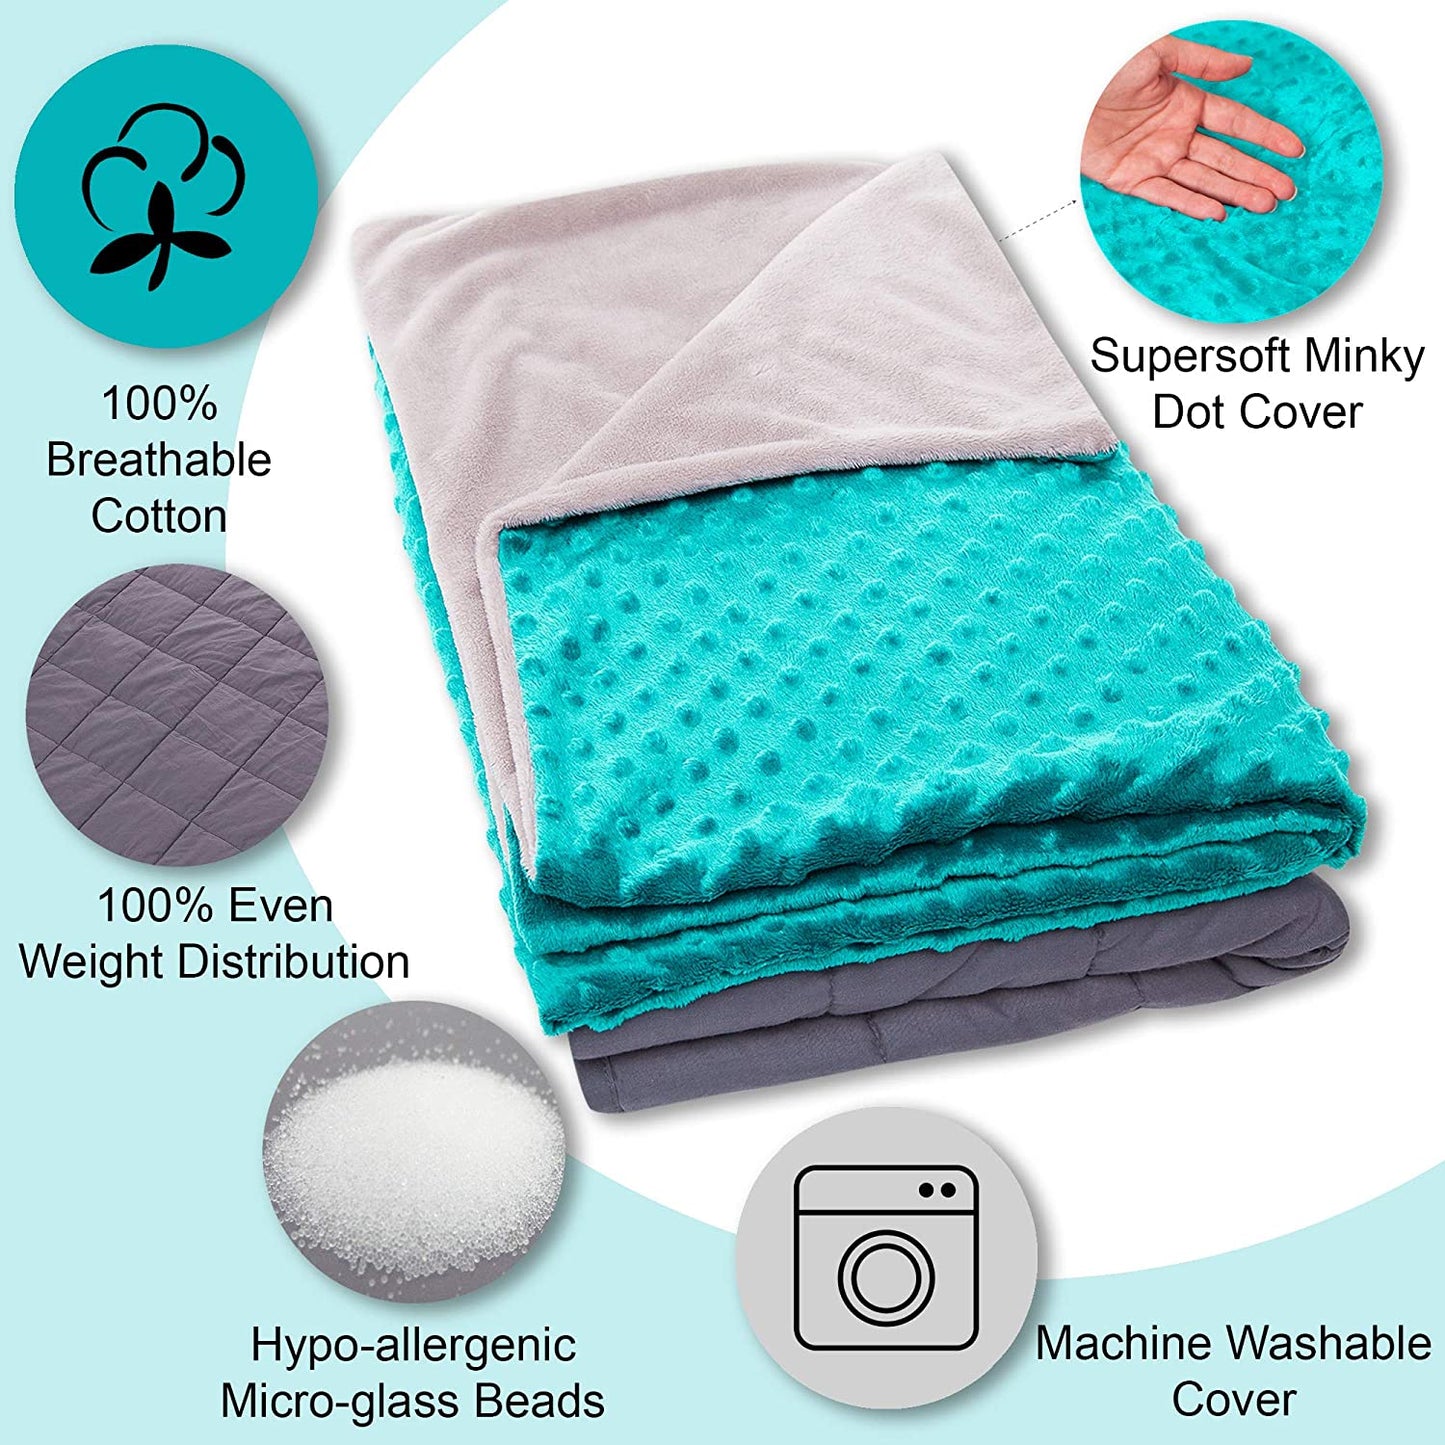 Super Soft 7 Lbs Weighted Blanket for Kids with Removable Cover - 41" x 60" Children Heavy Blanket for Kids Between 60-80 lbs - Kid Comfort Blankets for Girls and Boys - Hazli Collection 